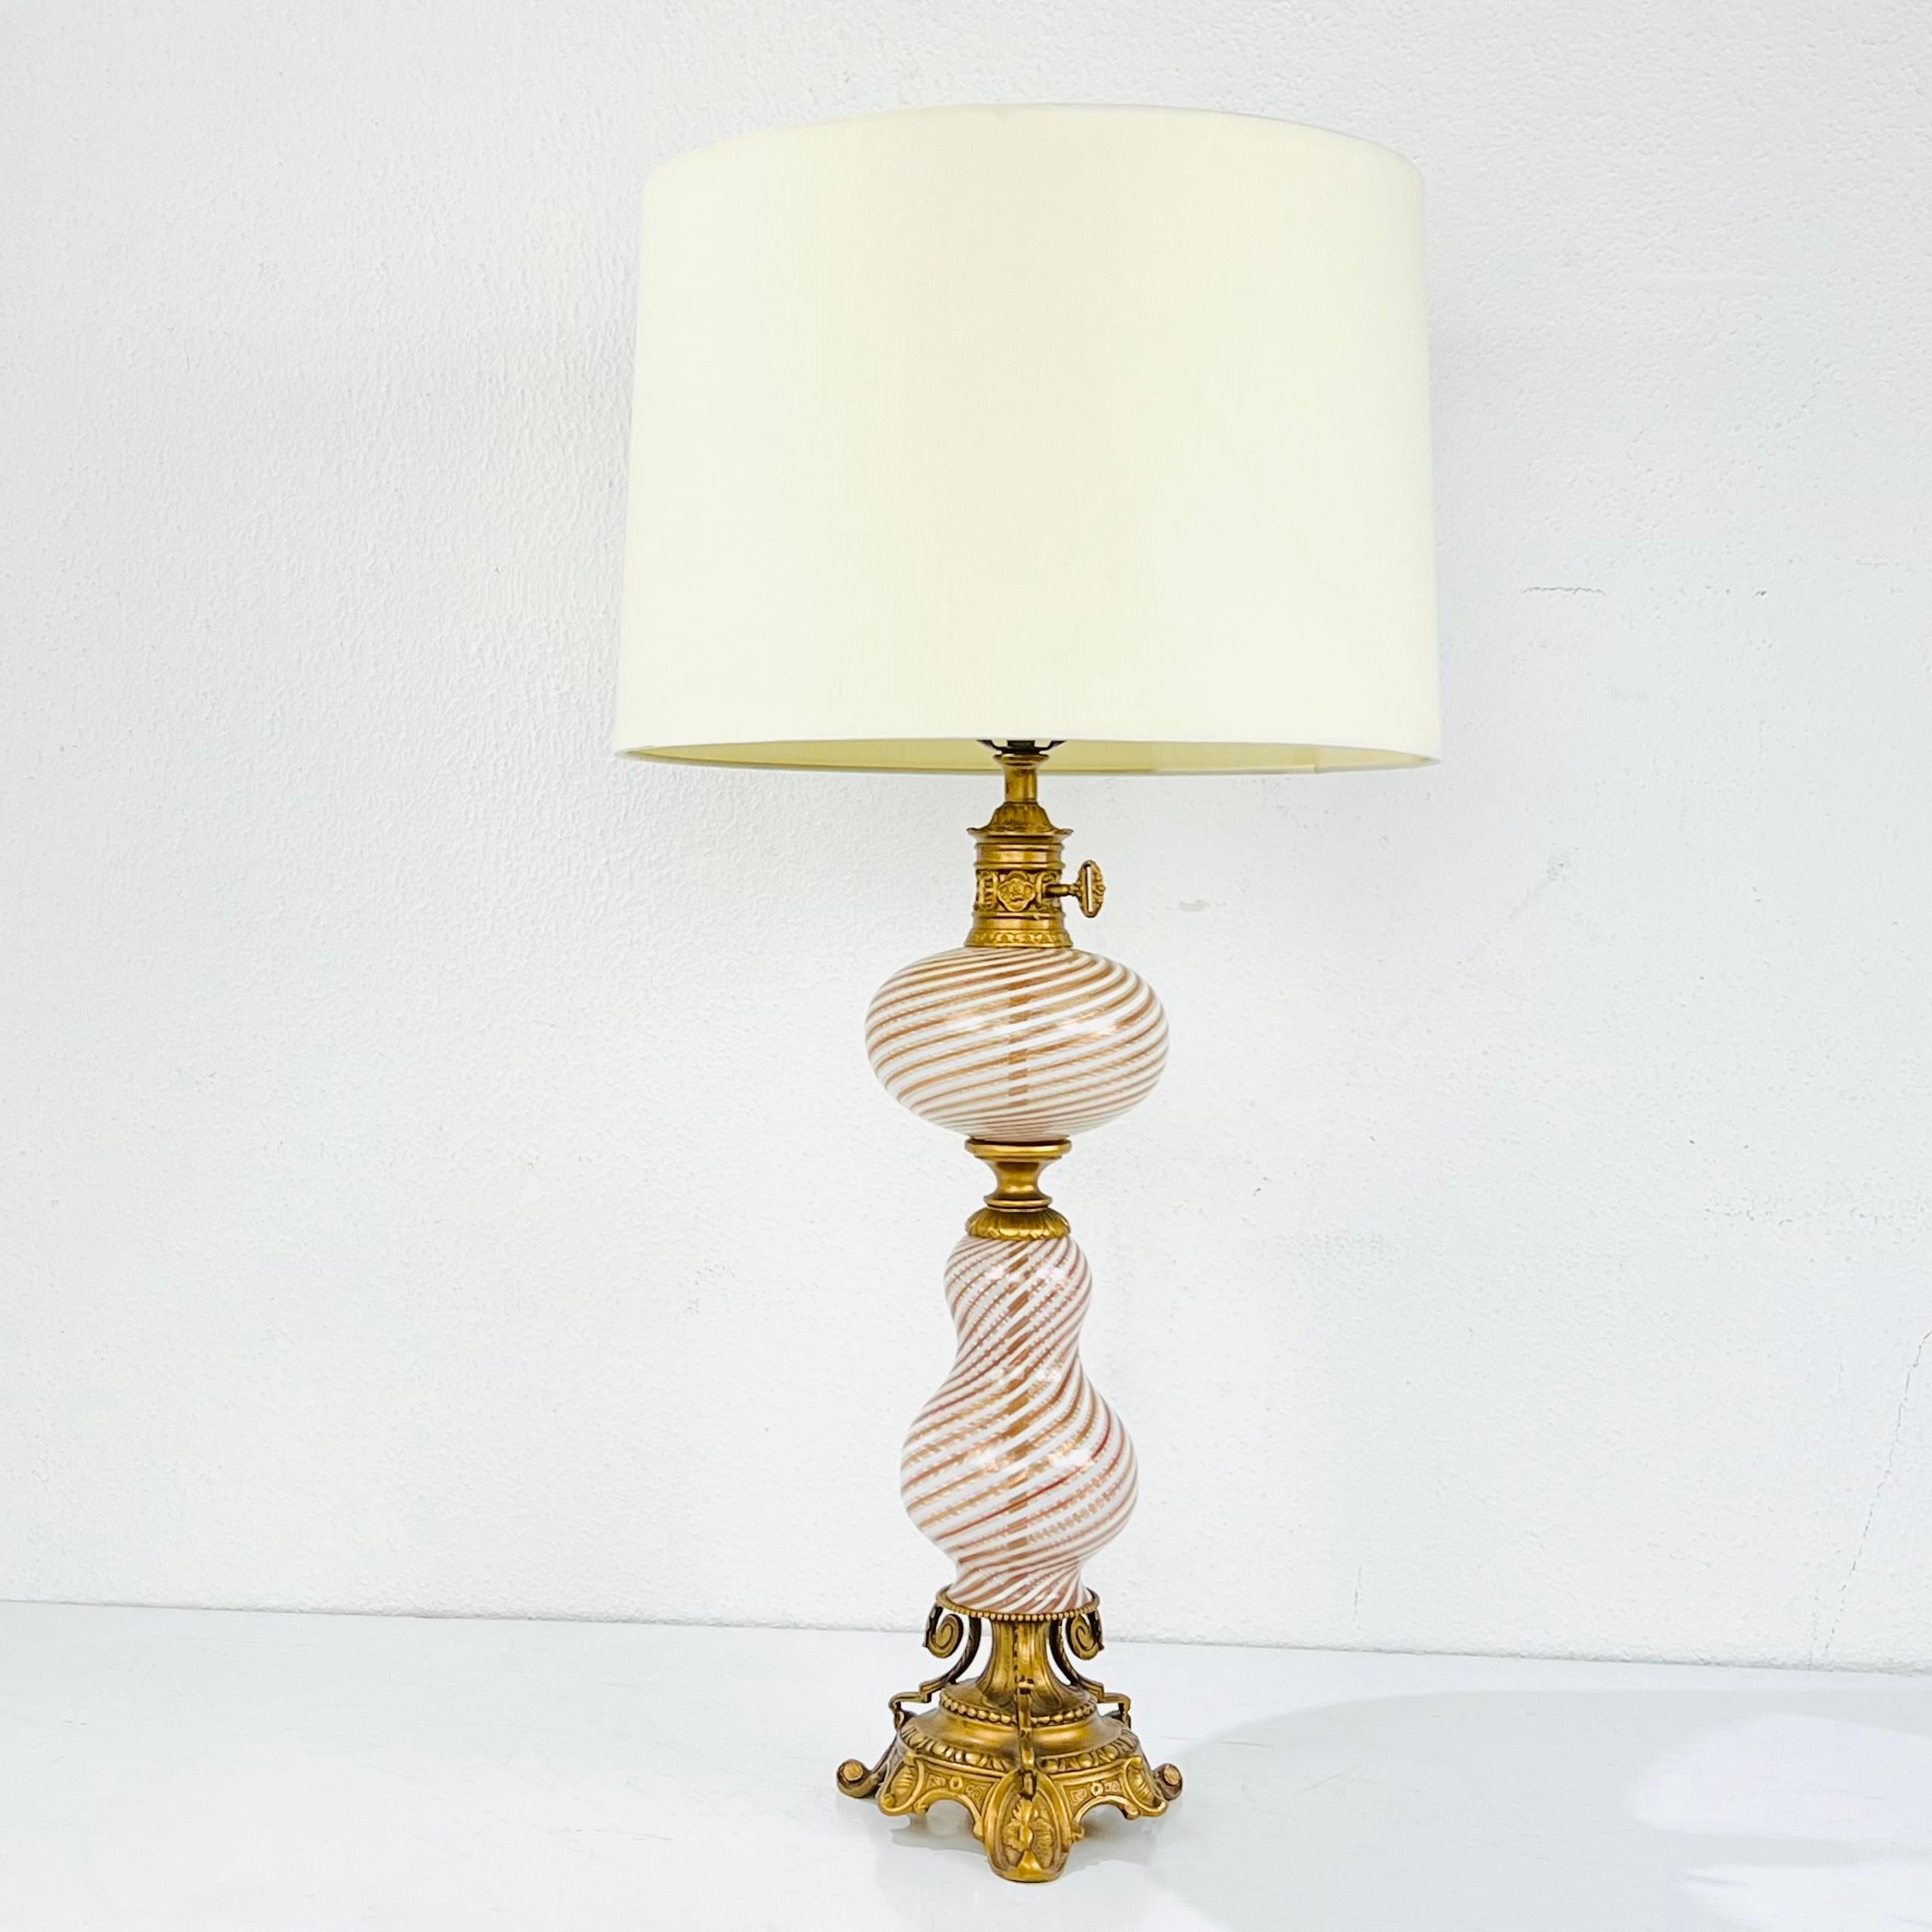 Chic antique hand-blown Murano glass table lamp by Dino Martens. In good, original, clean and working condition. Made in Italy, original sticker still present. Wired for US. Shade not included.